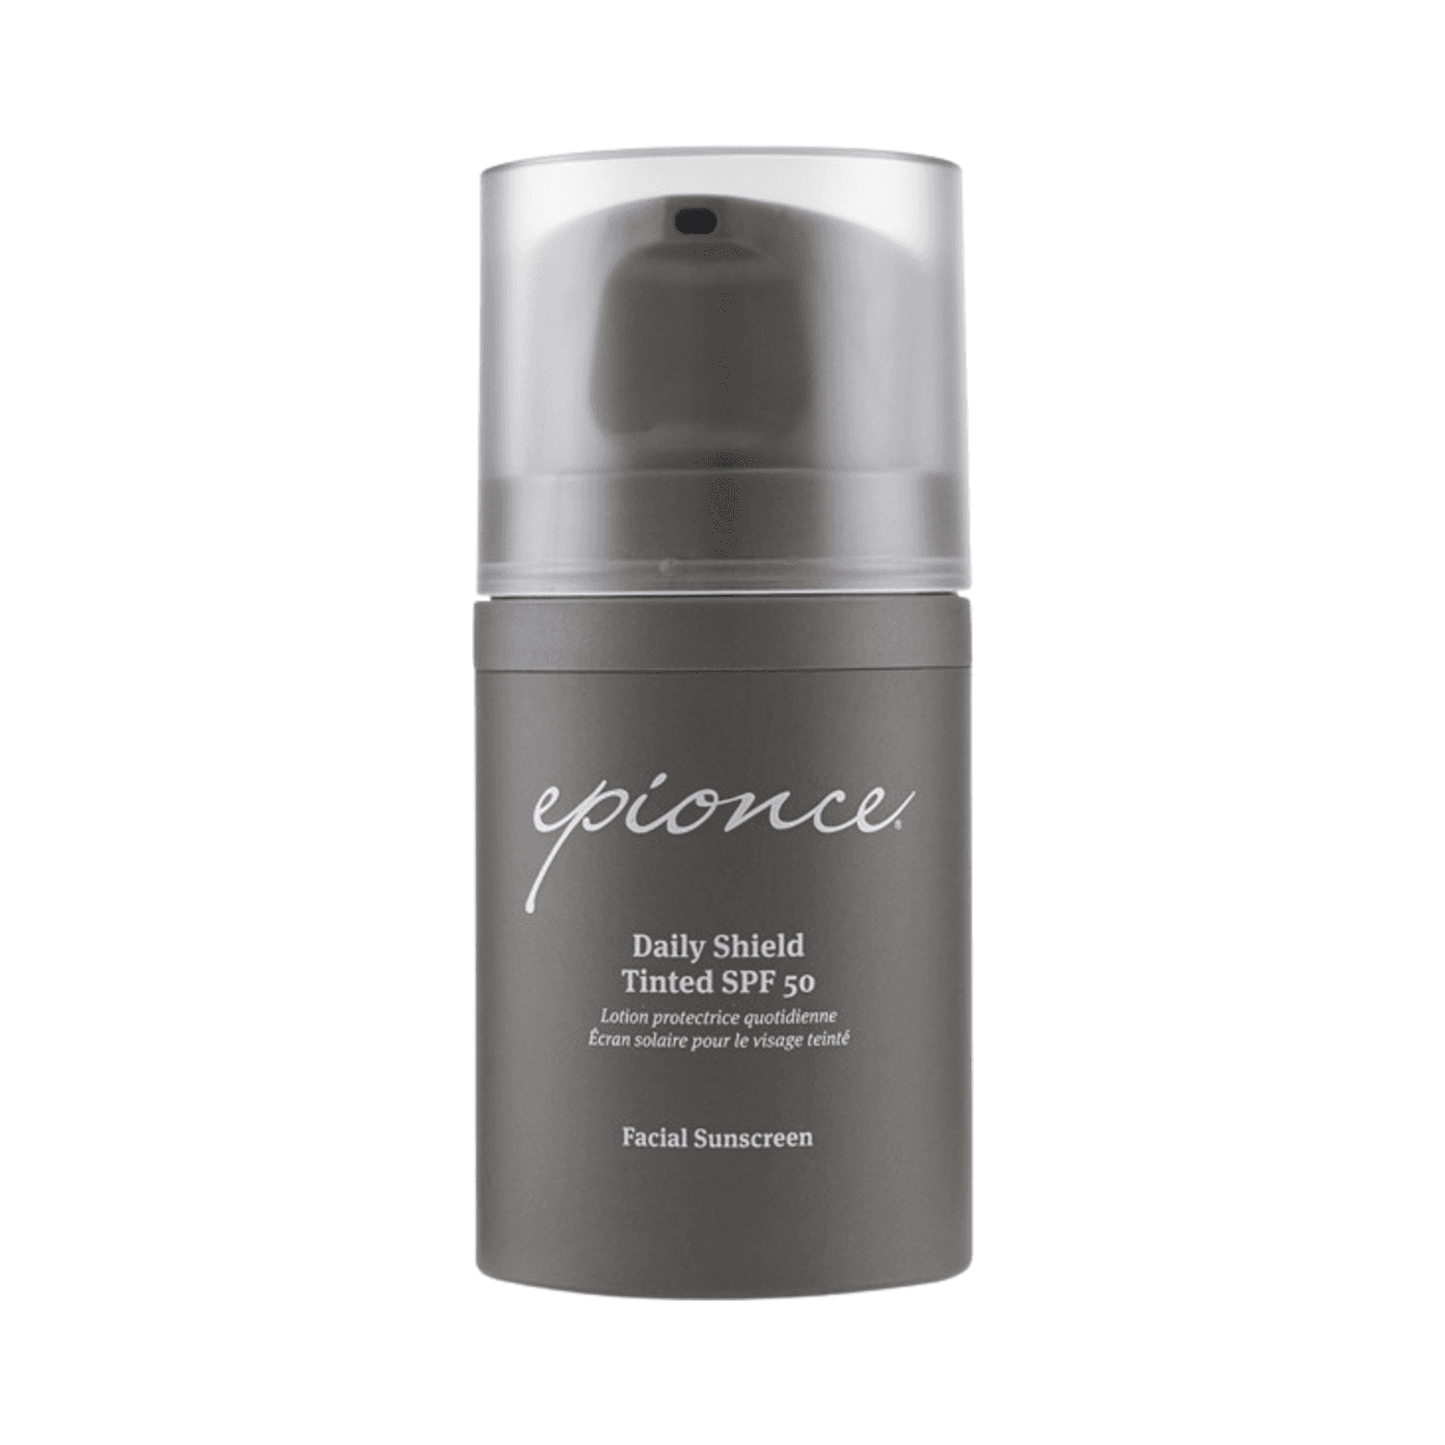 Epionce Daily Shield Tinted SPF 50